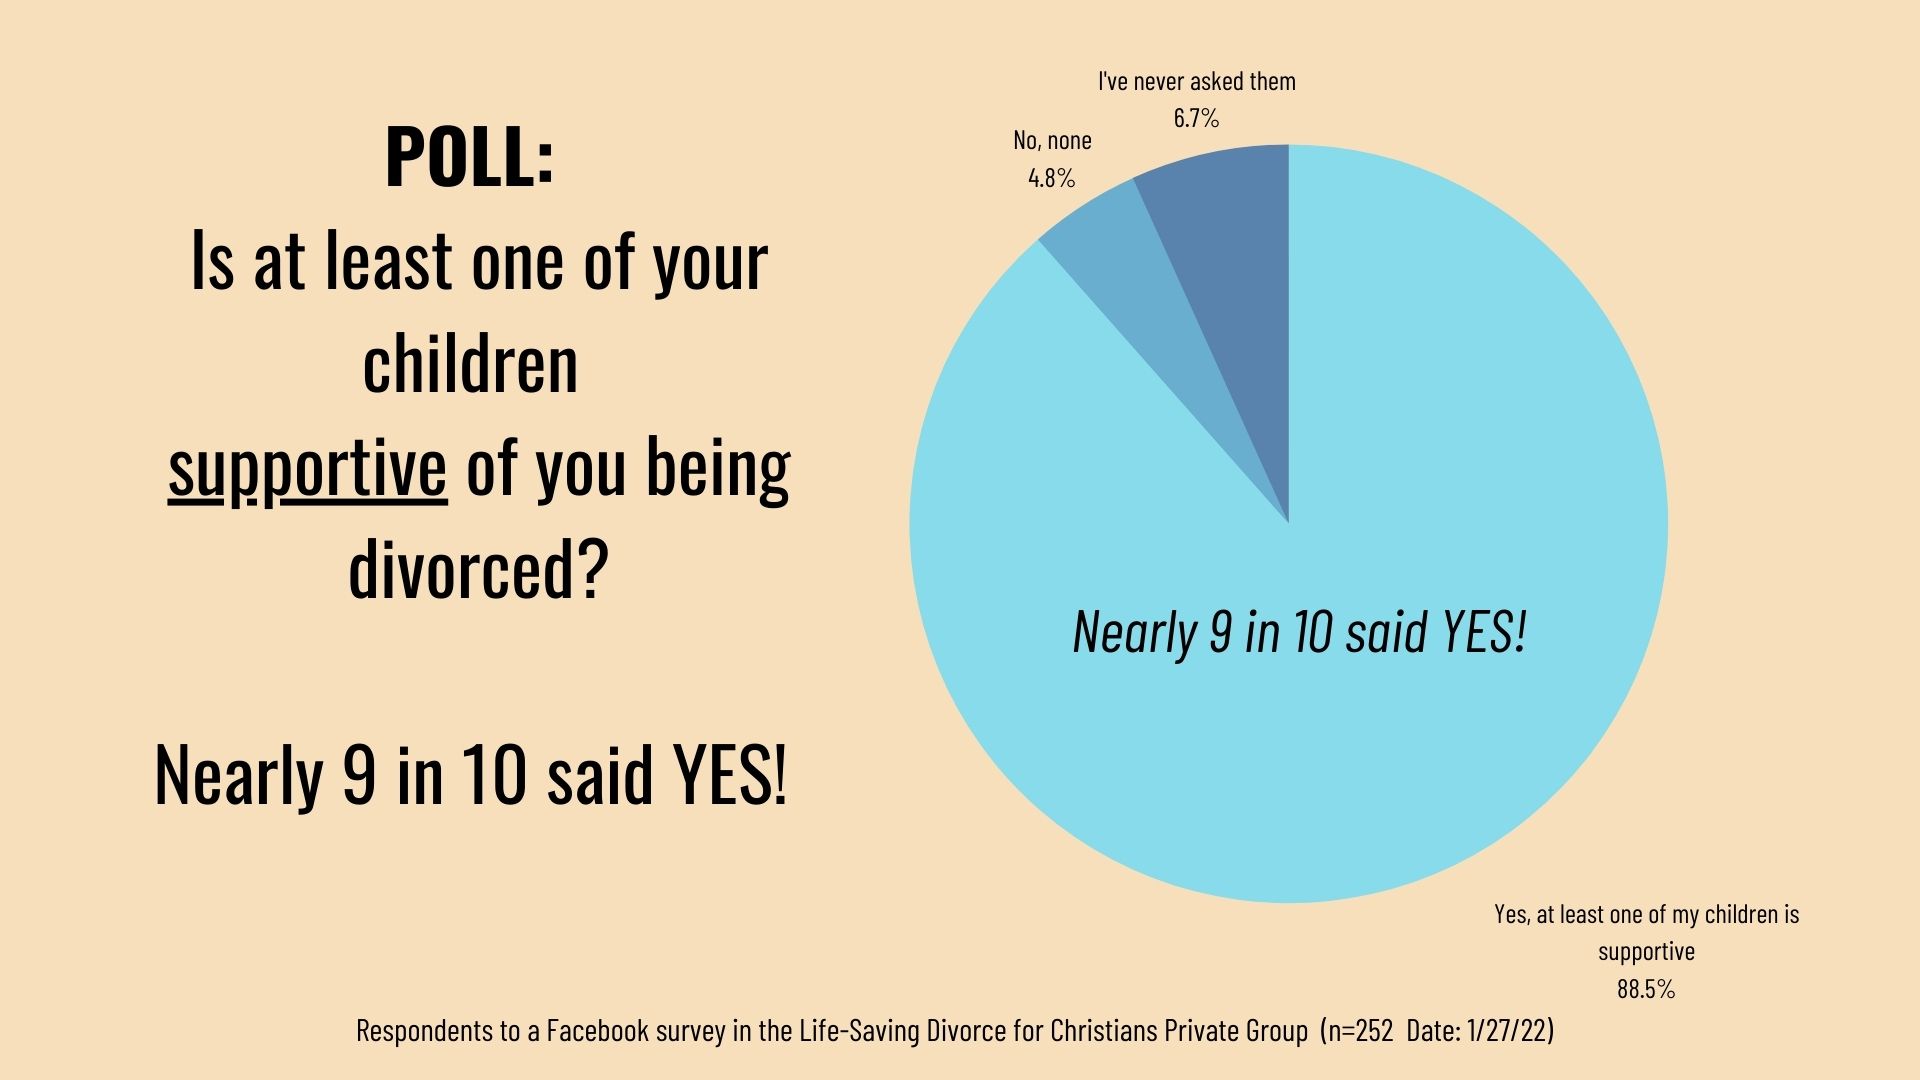 Nearly 9 in 10 parents who responded said at least one child was supportive of them being divorced.